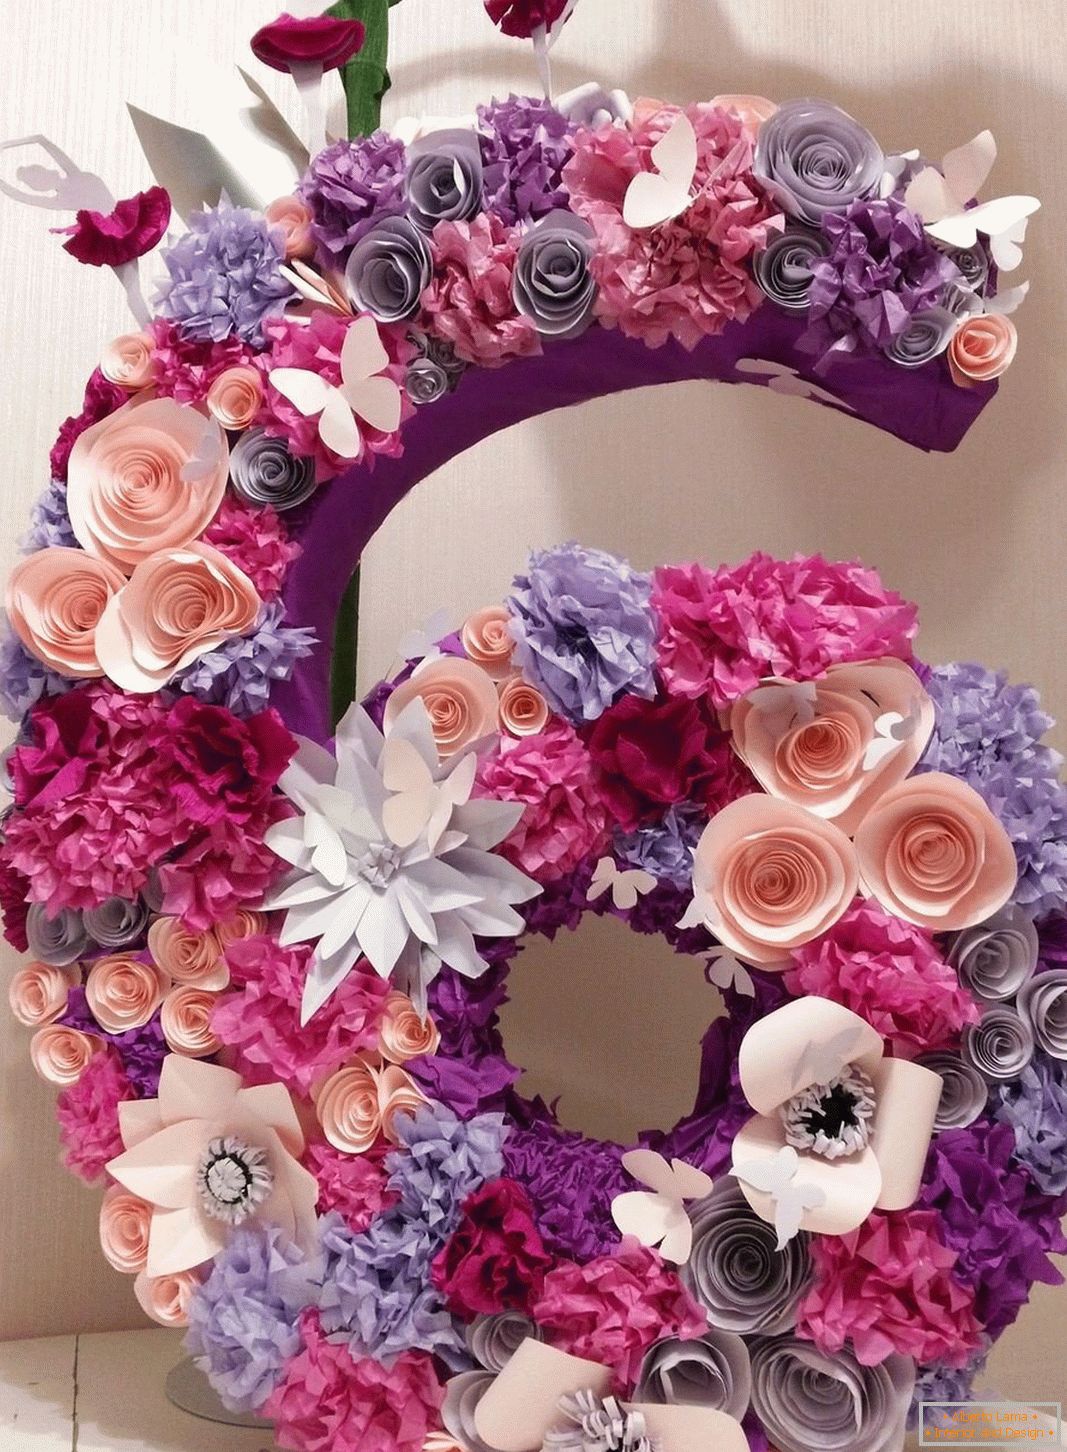 Composition from flowers on number 6